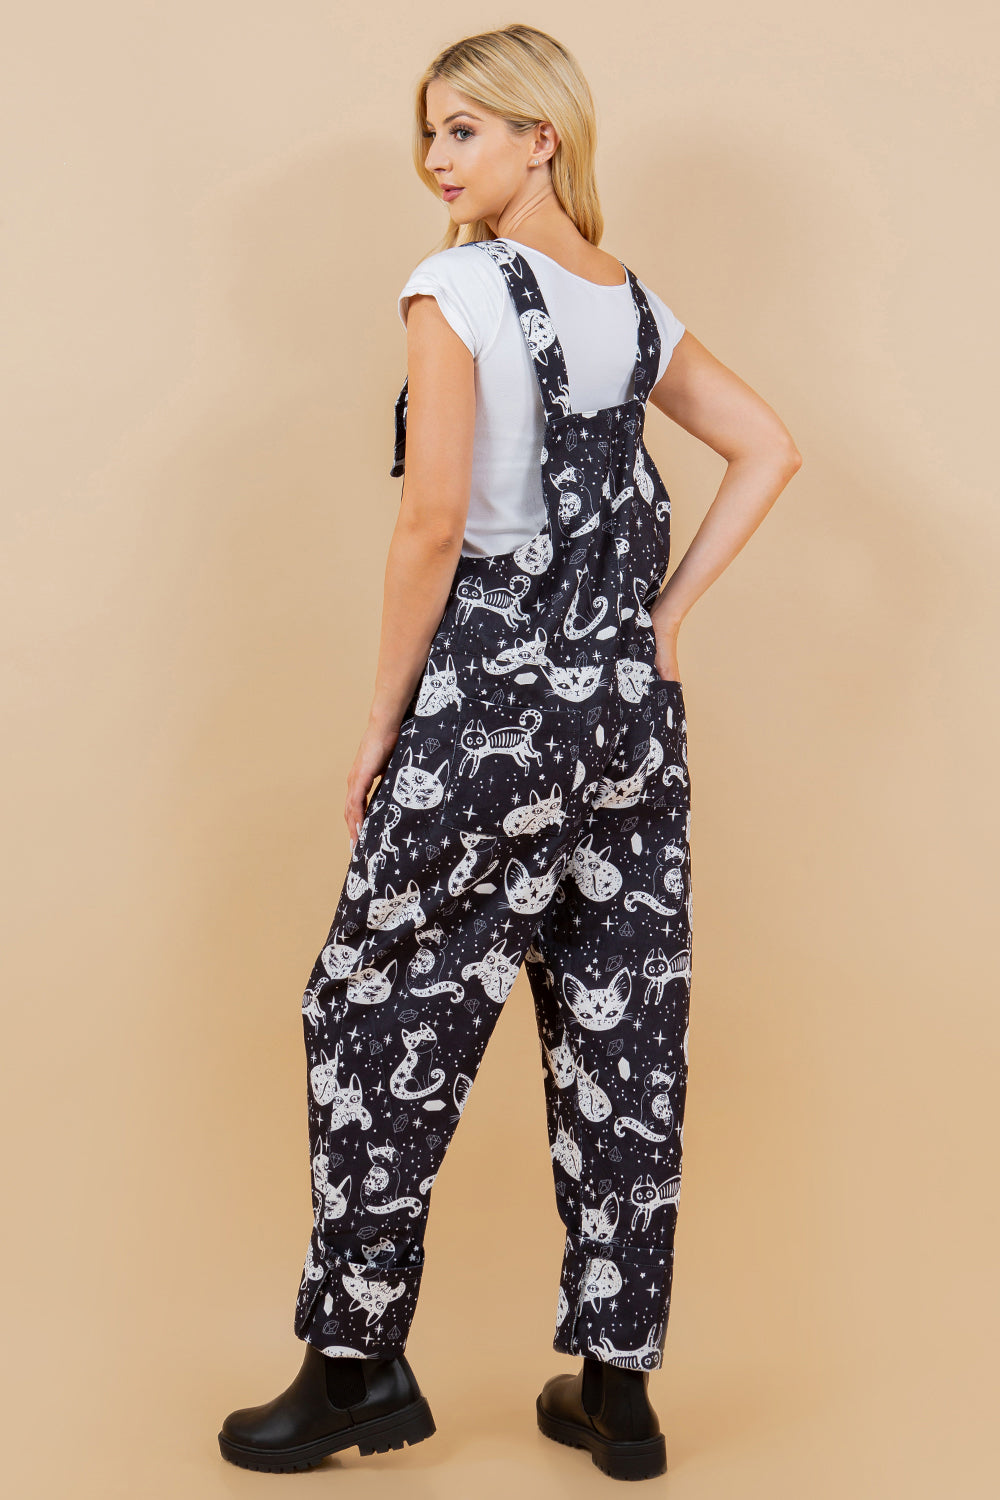 Crystal Cats Overall Jumpsuit